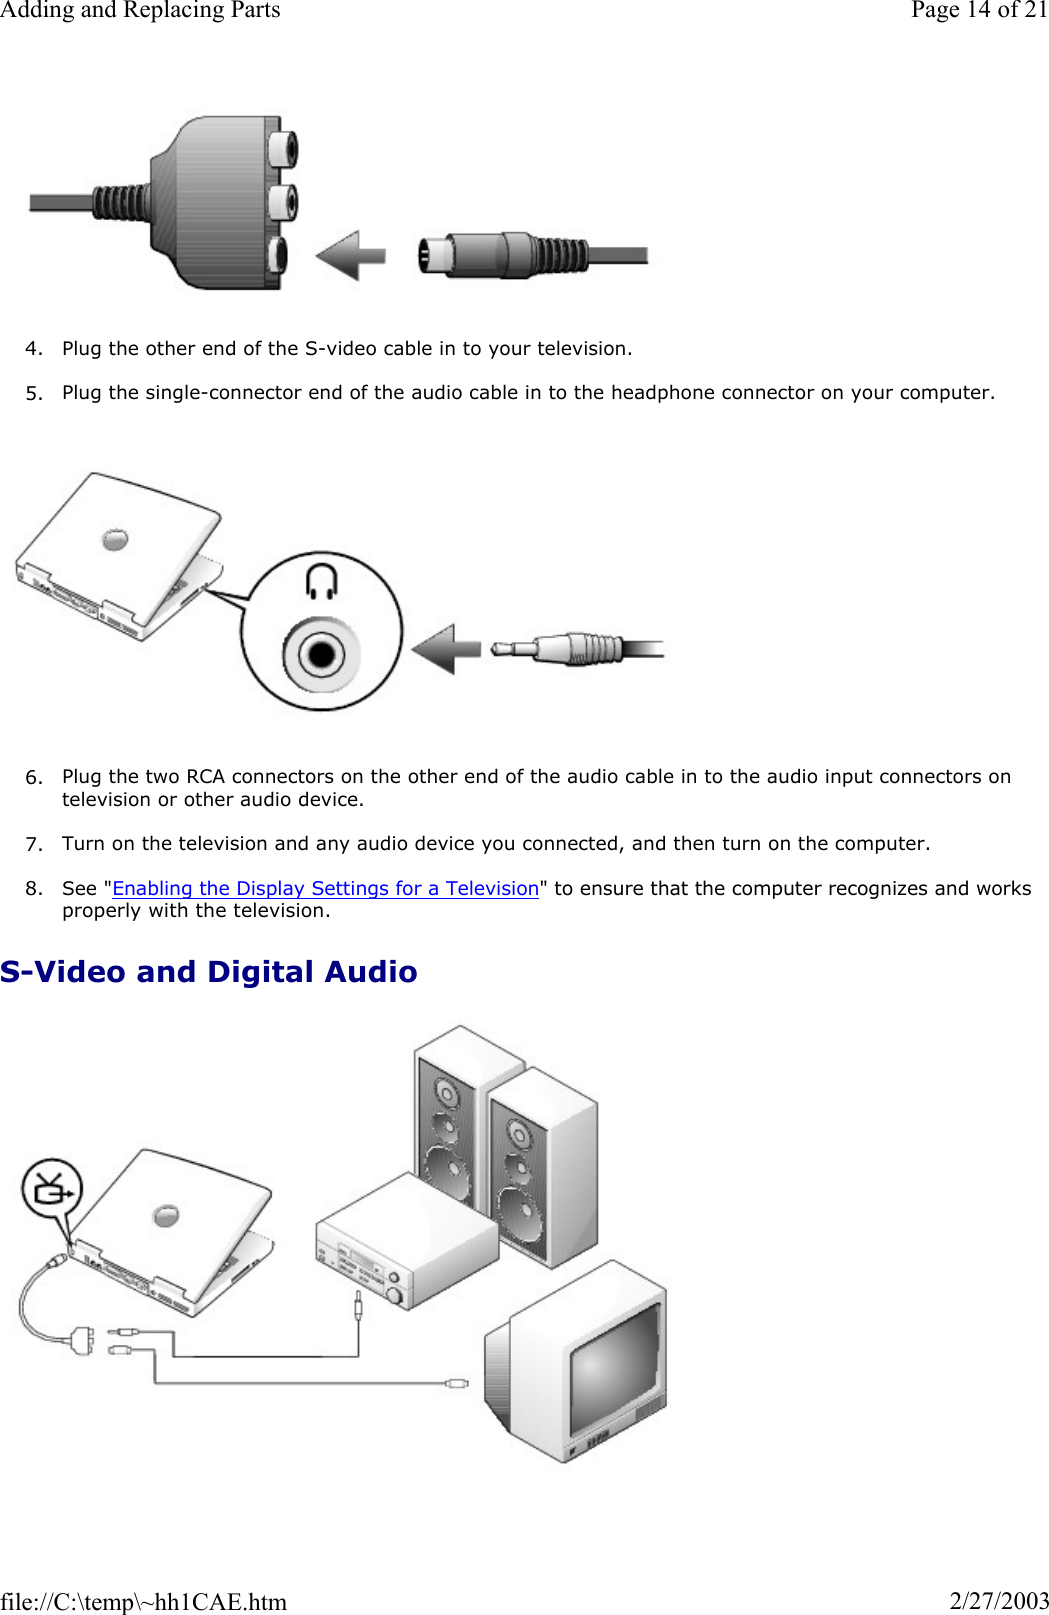 4. Plug the other end of the S-video cable in to your television. 5. Plug the single-connector end of the audio cable in to the headphone connector on your computer. 6. Plug the two RCA connectors on the other end of the audio cable in to the audio input connectors on television or other audio device. 7. Turn on the television and any audio device you connected, and then turn on the computer. 8. See &quot;Enabling the Display Settings for a Television&quot; to ensure that the computer recognizes and works properly with the television. S-Video and Digital Audio Page 14 of 21Adding and Replacing Parts2/27/2003file://C:\temp\~hh1CAE.htm